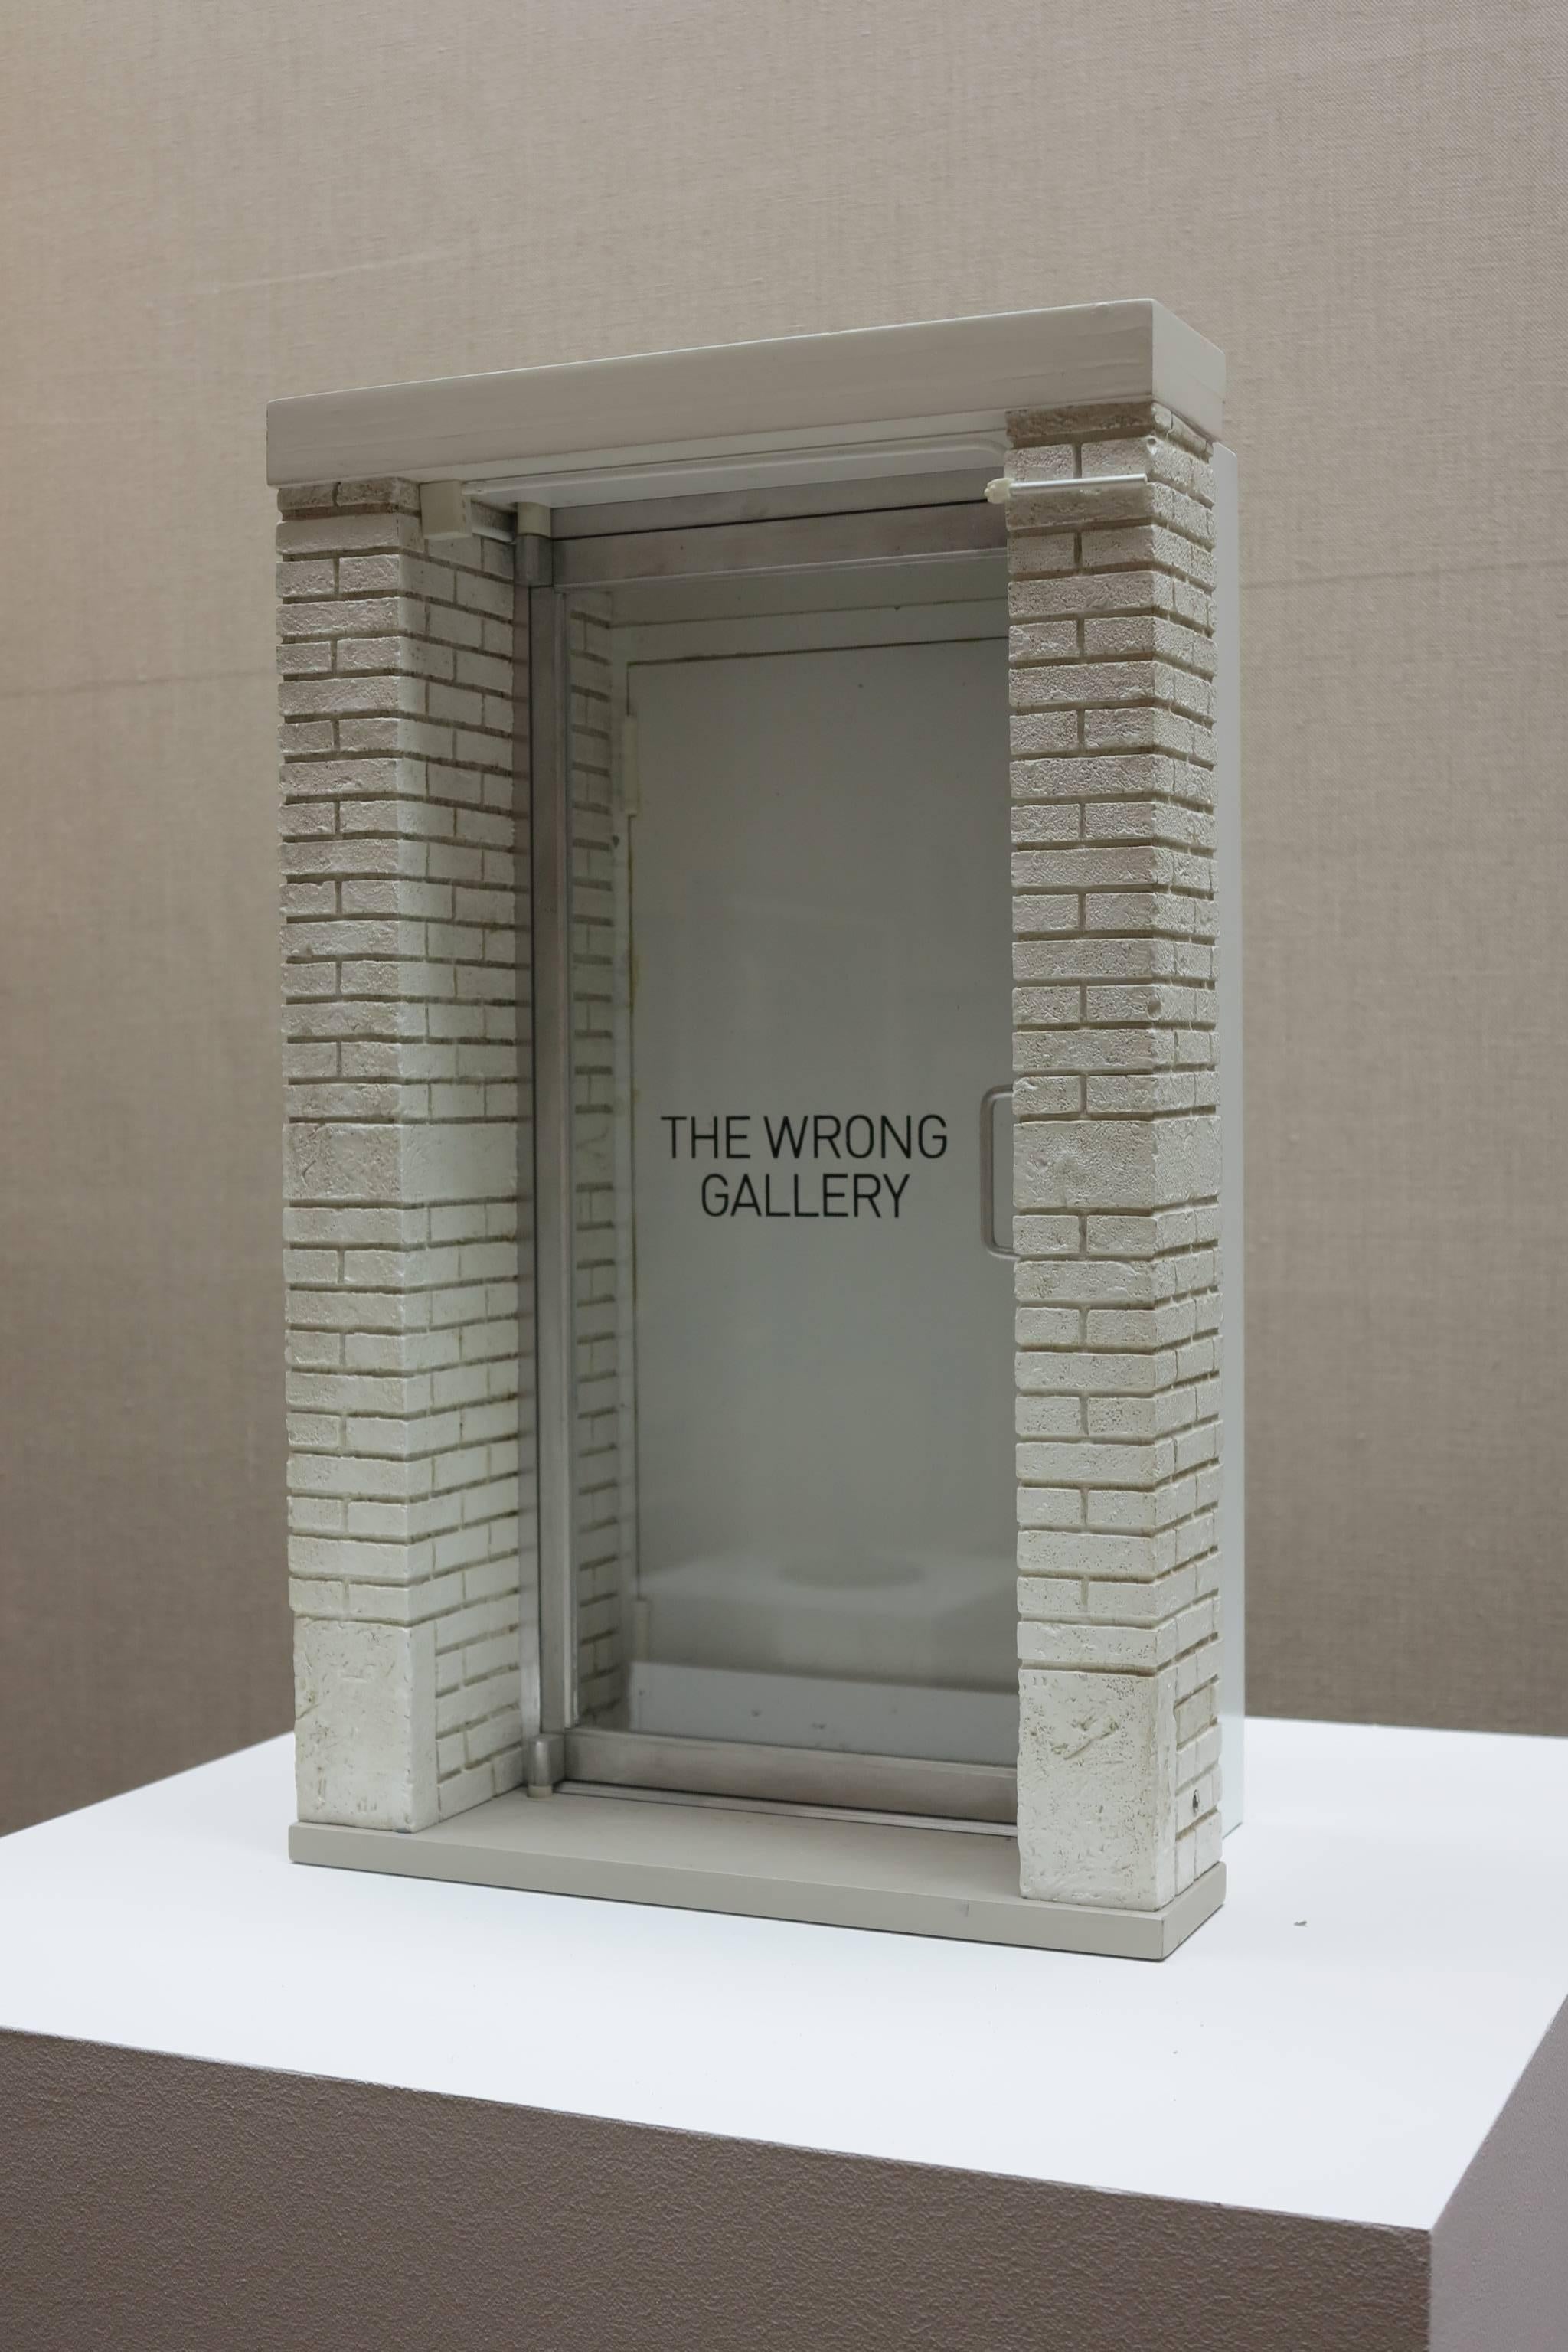 The Wrong Gallery - Sculpture by Maurizio Cattelan